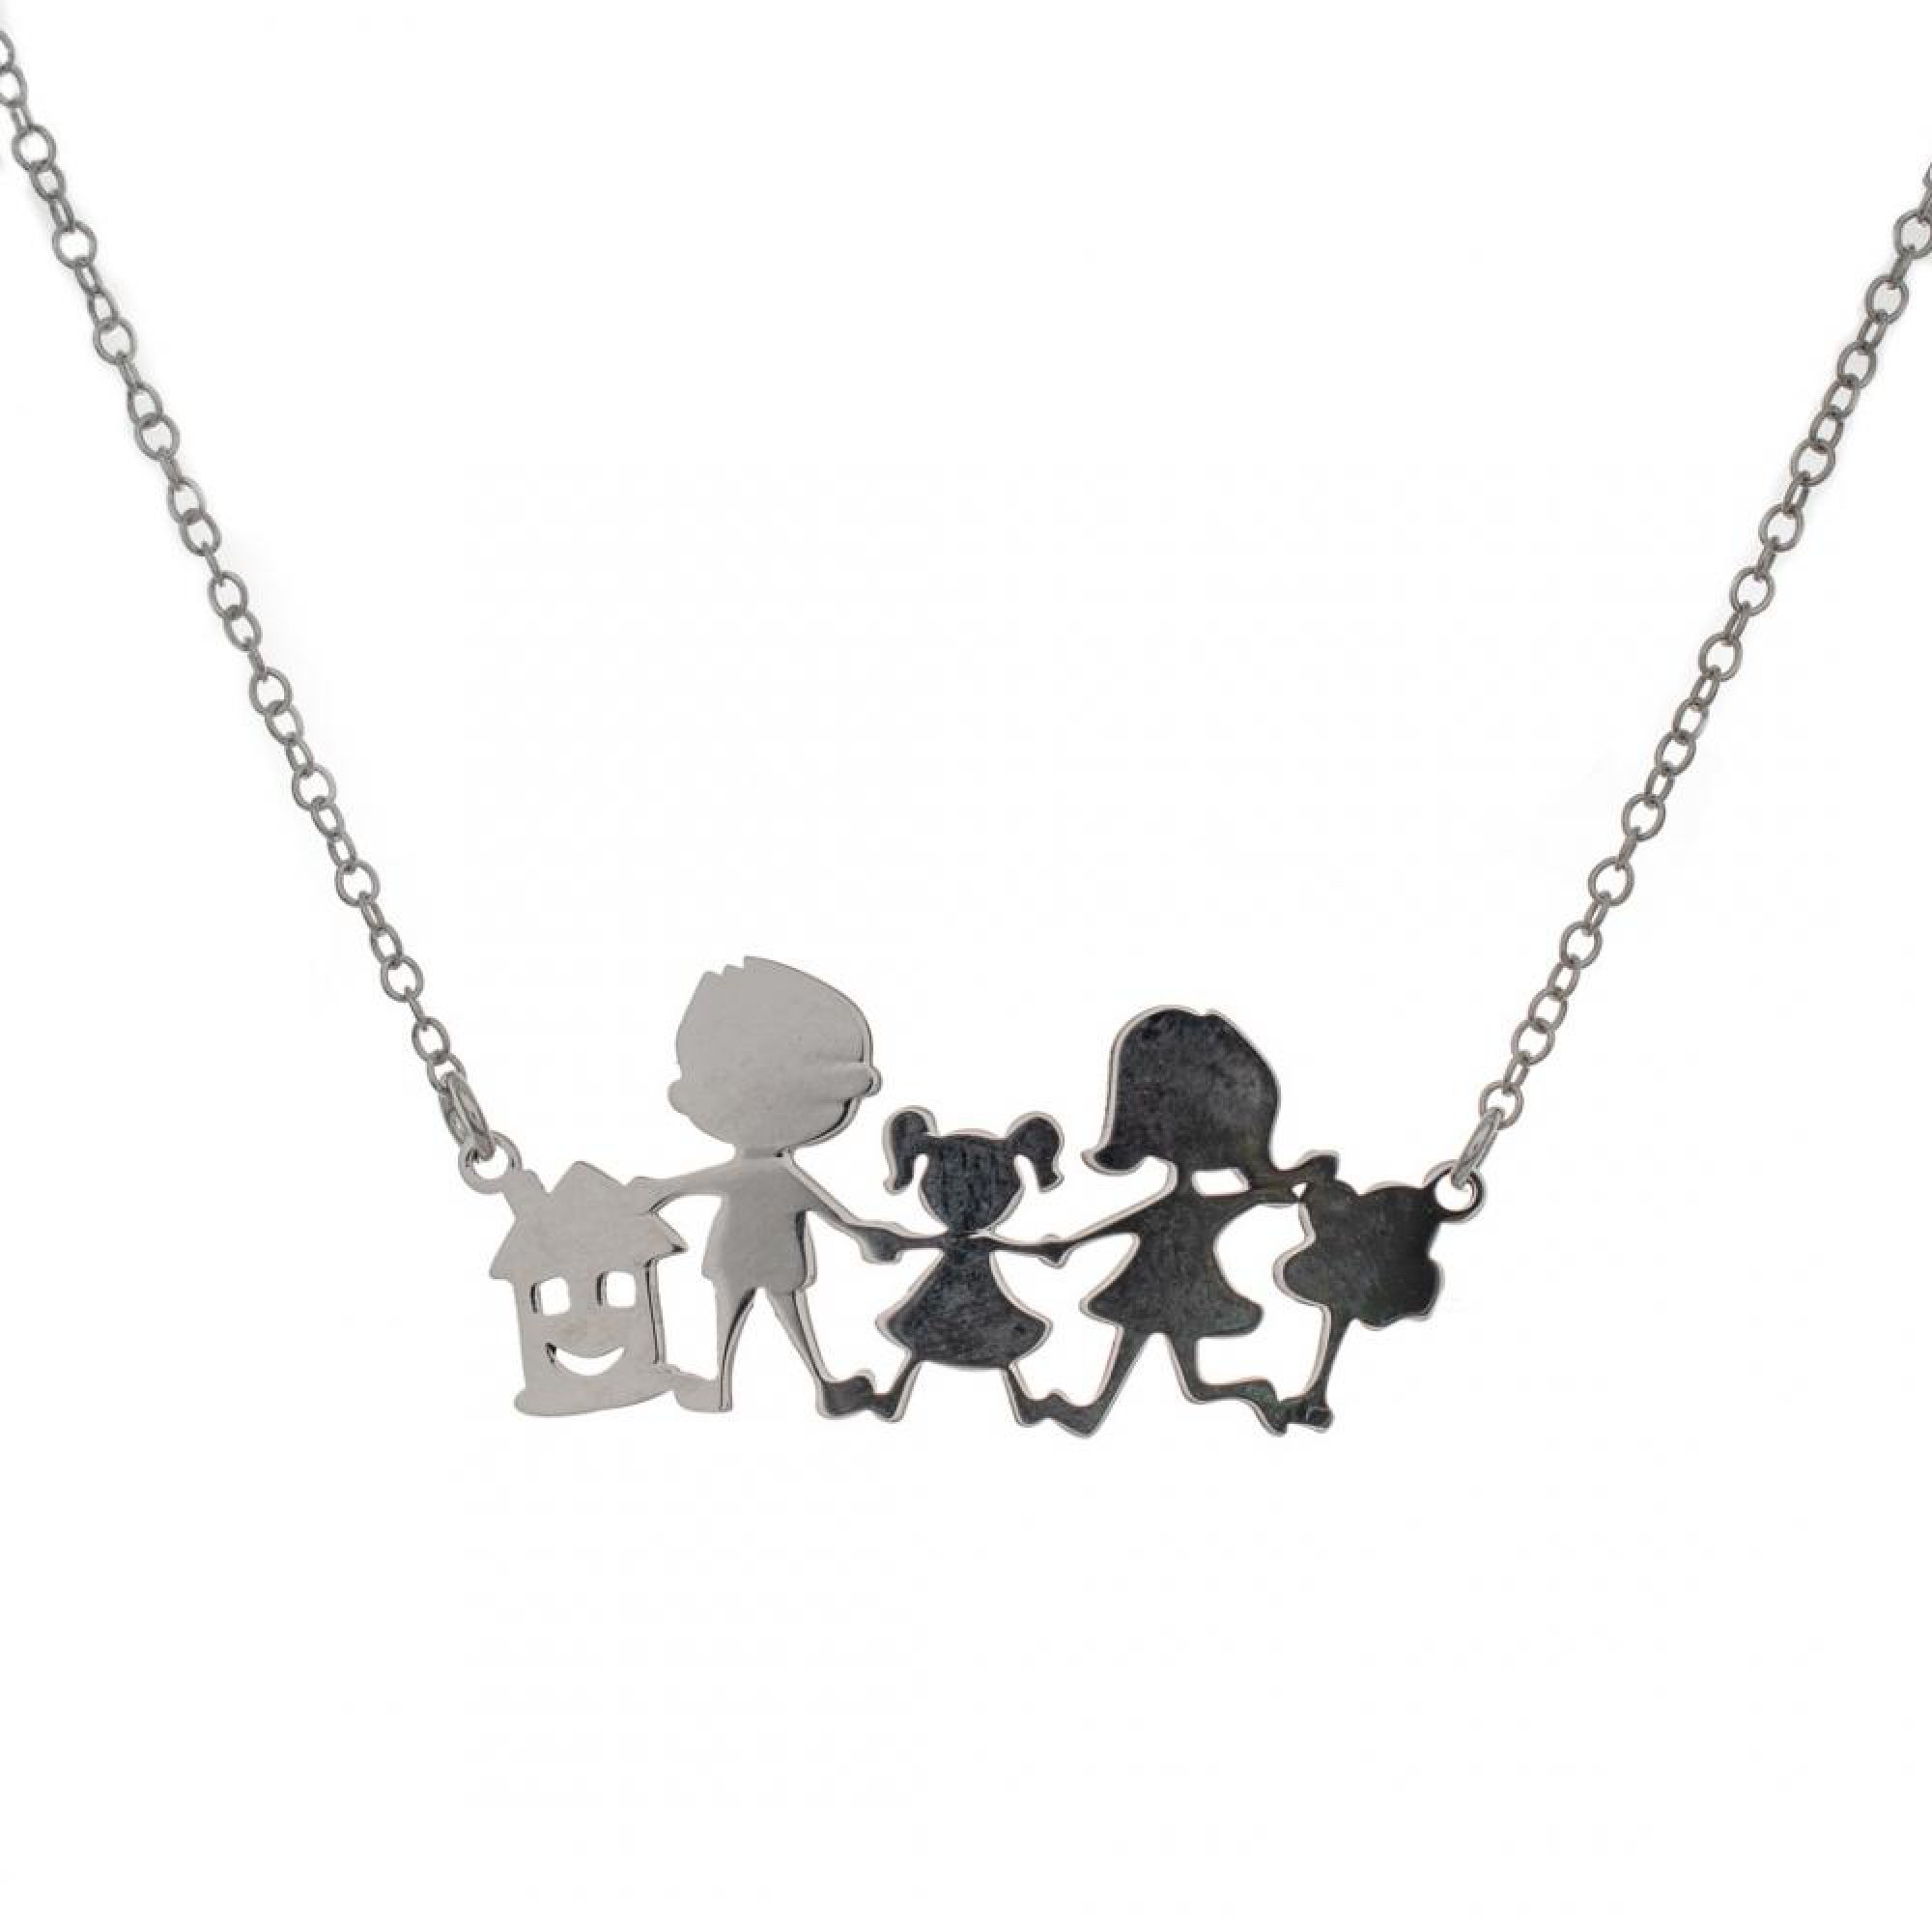 Family necklace 1 girl 